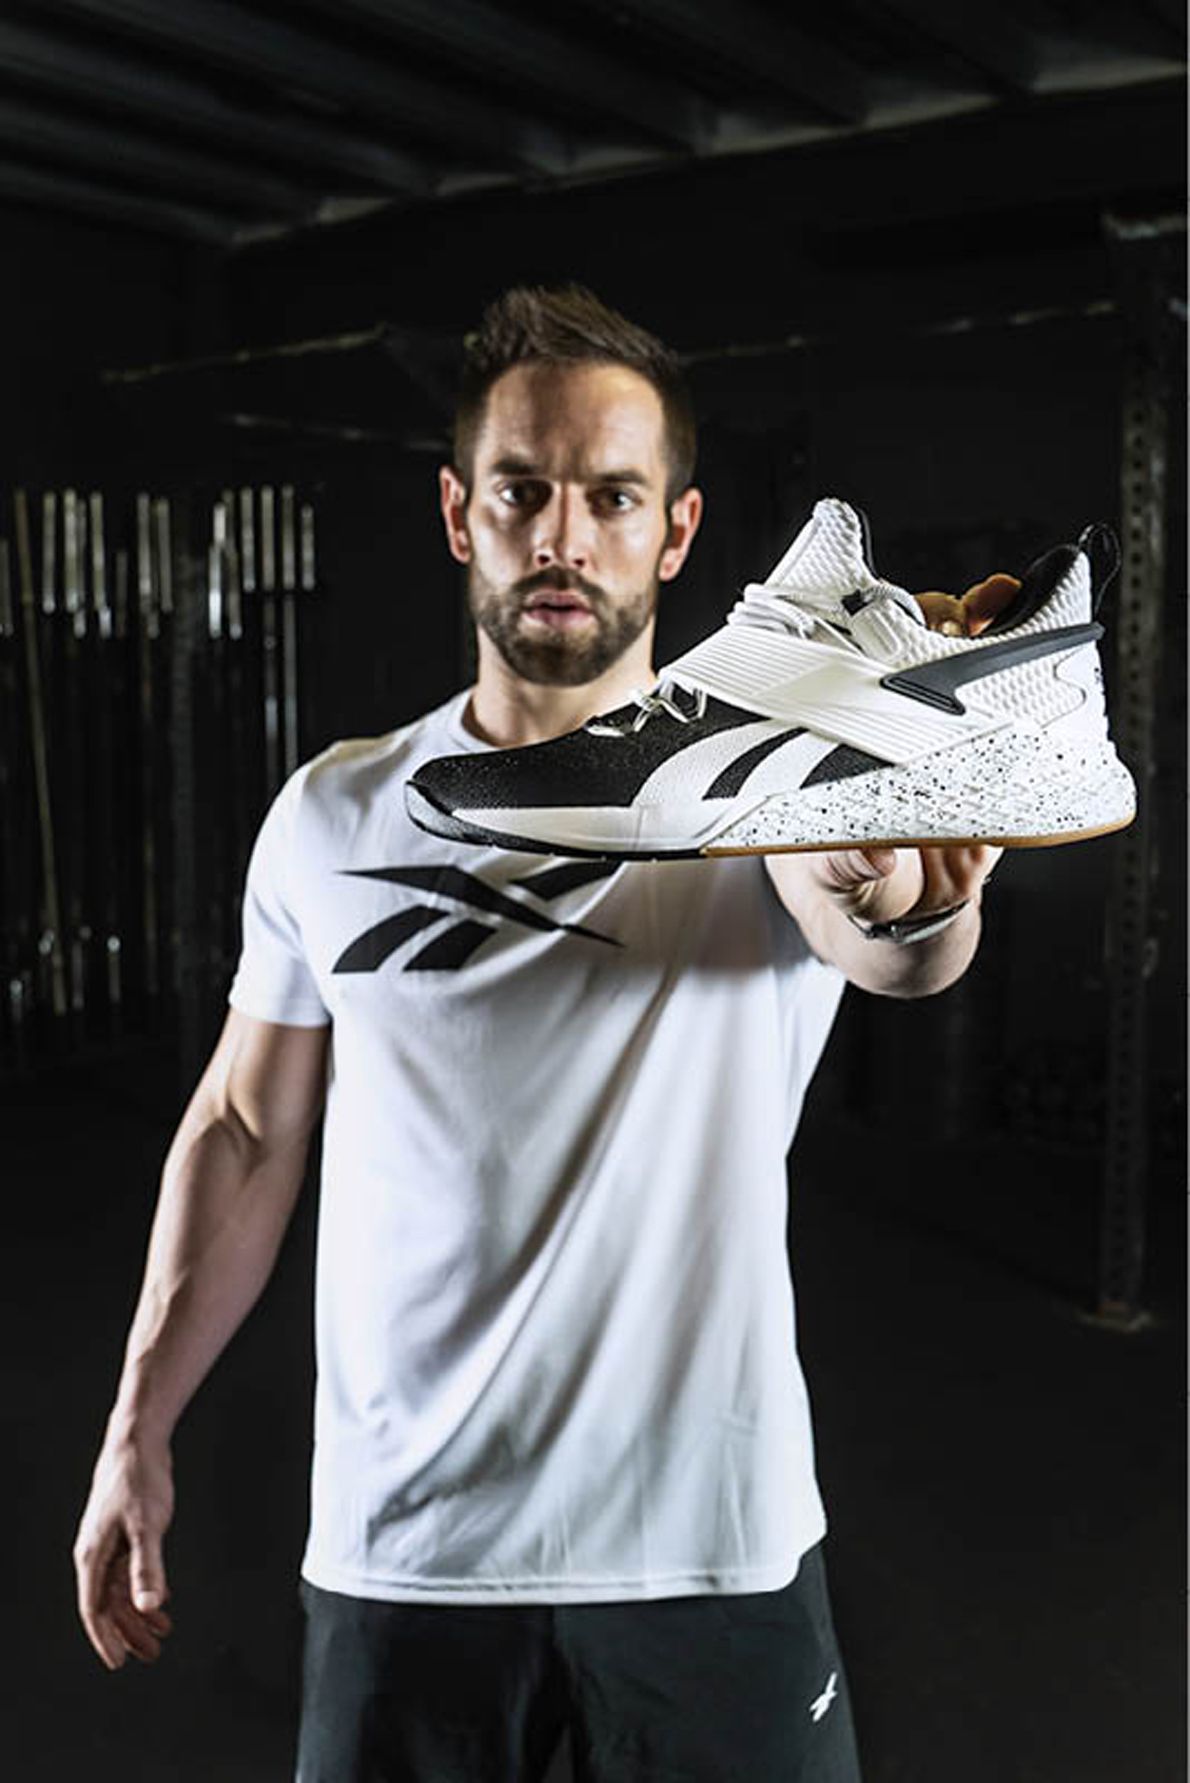 Rich Froning X Reebok Nano X1 Release Info, Images More – Footwear News ...